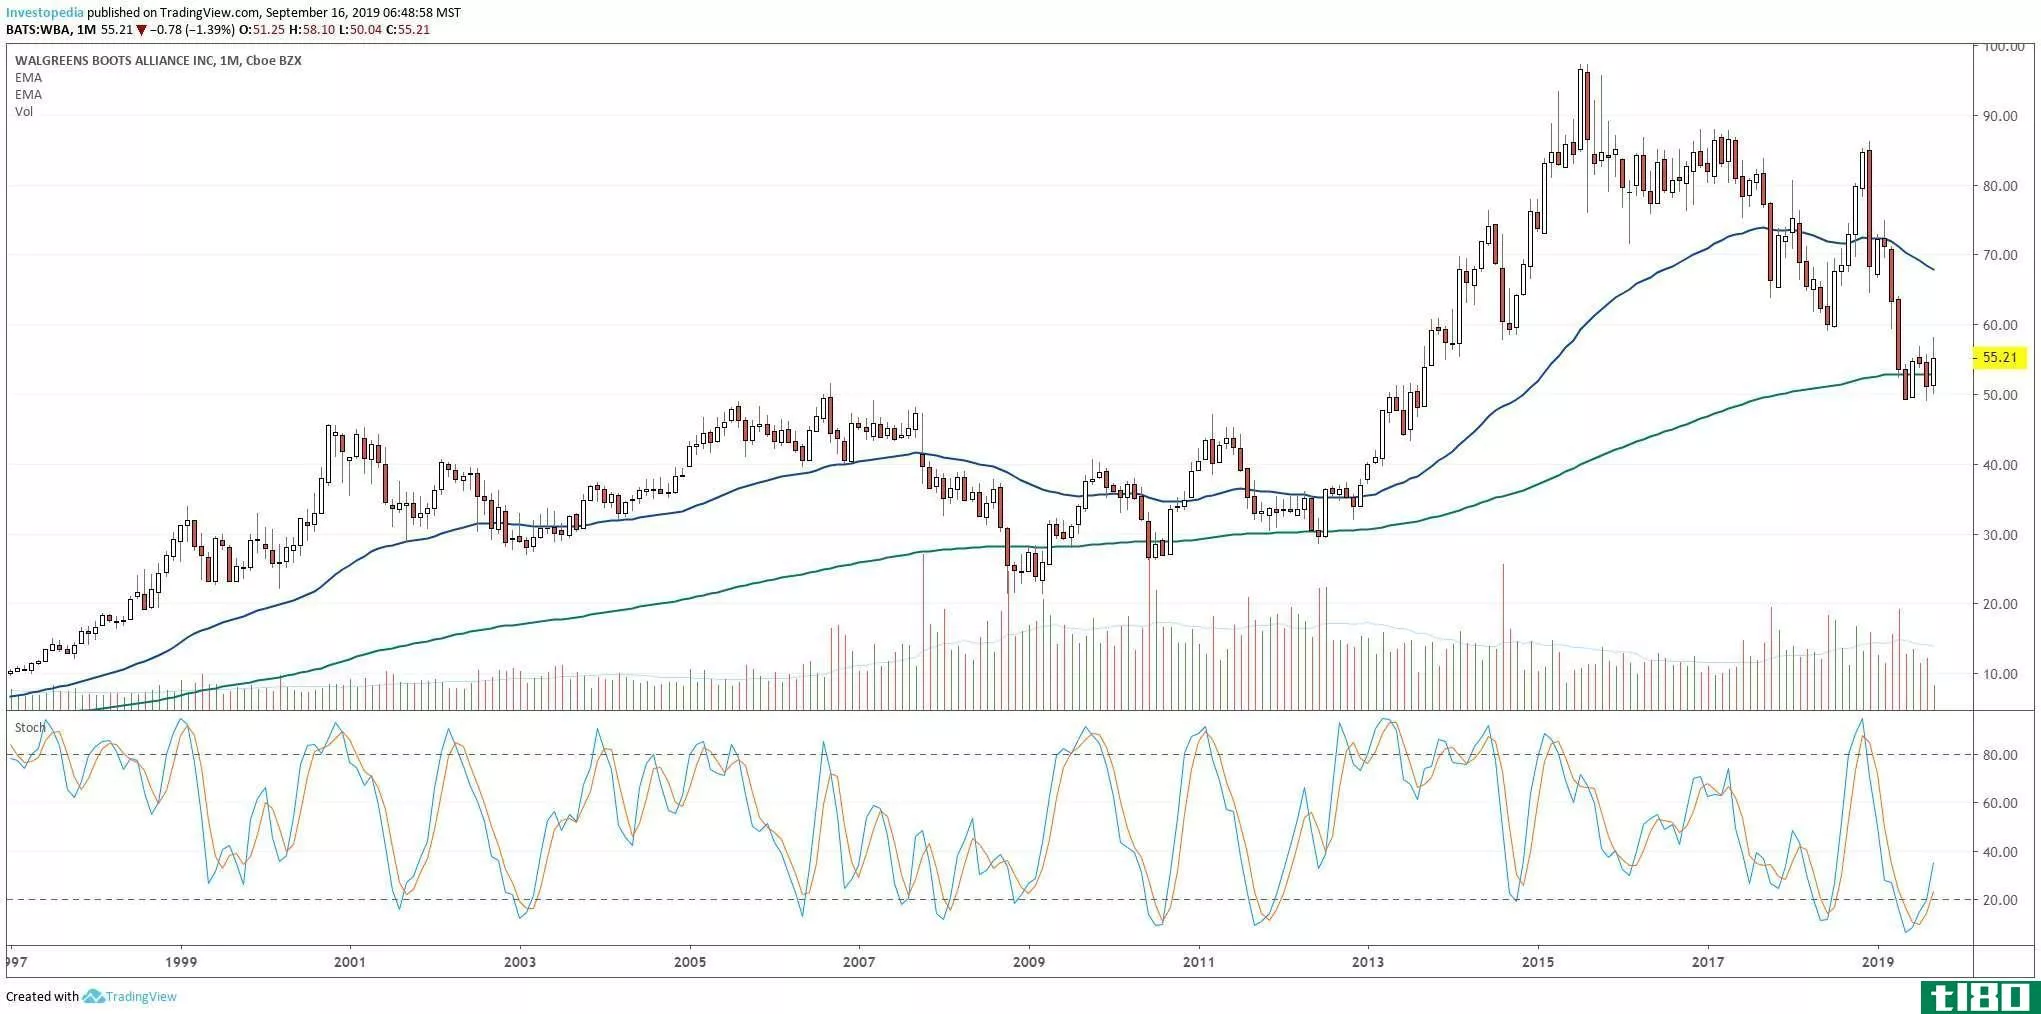 Long-term chart showing the share pricer performance of Walgreens Boots Alliance, Inc. (WBA)